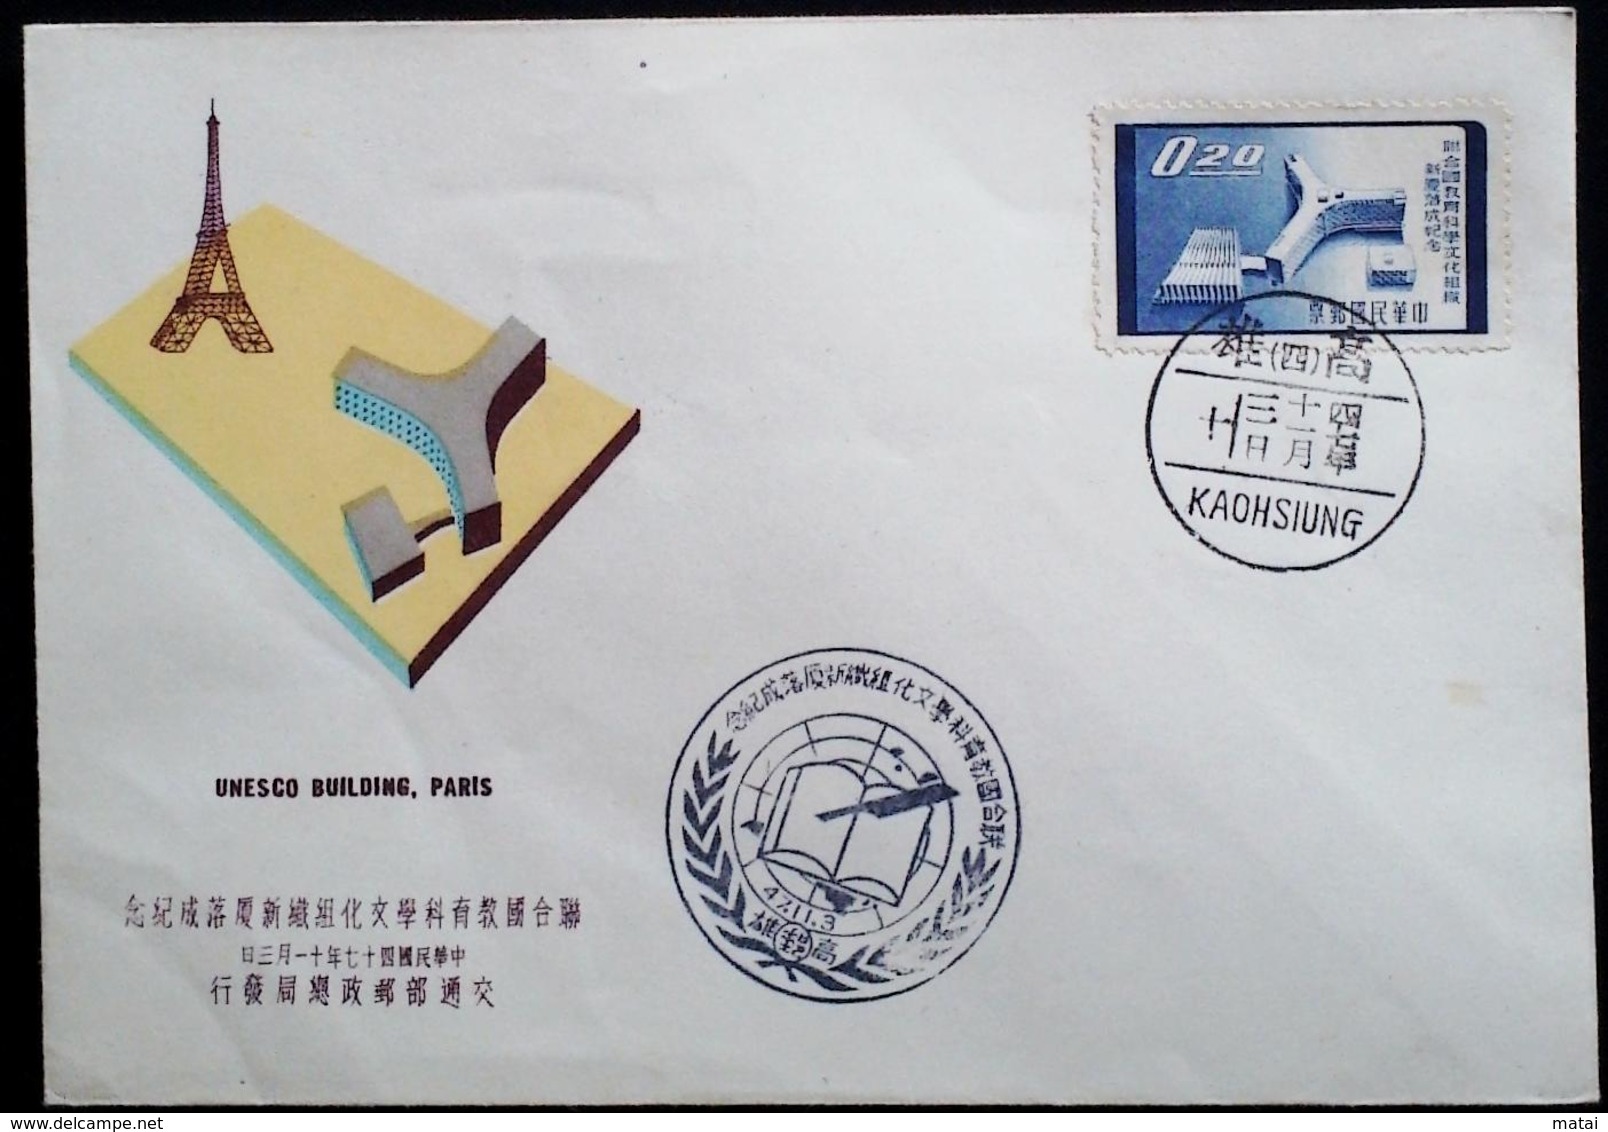 CHINA CHINE CINA 1958 TAIWAN (FORMOSA) F.D.C. COVER - Covers & Documents